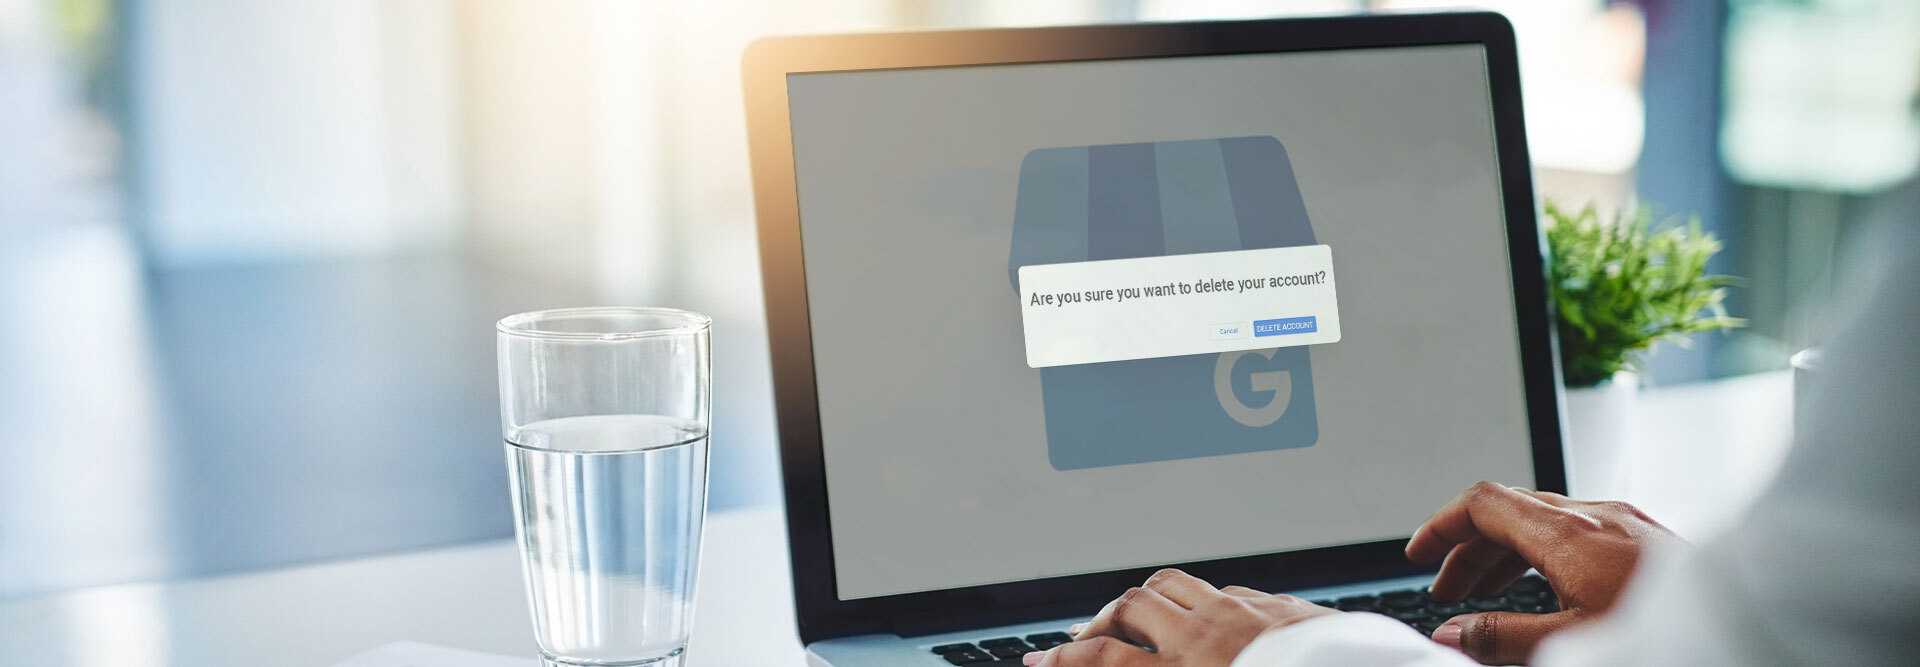 A laptop on a desk displaying the pop-up text “Are you sure you want to delete your Google Business Profile account?”